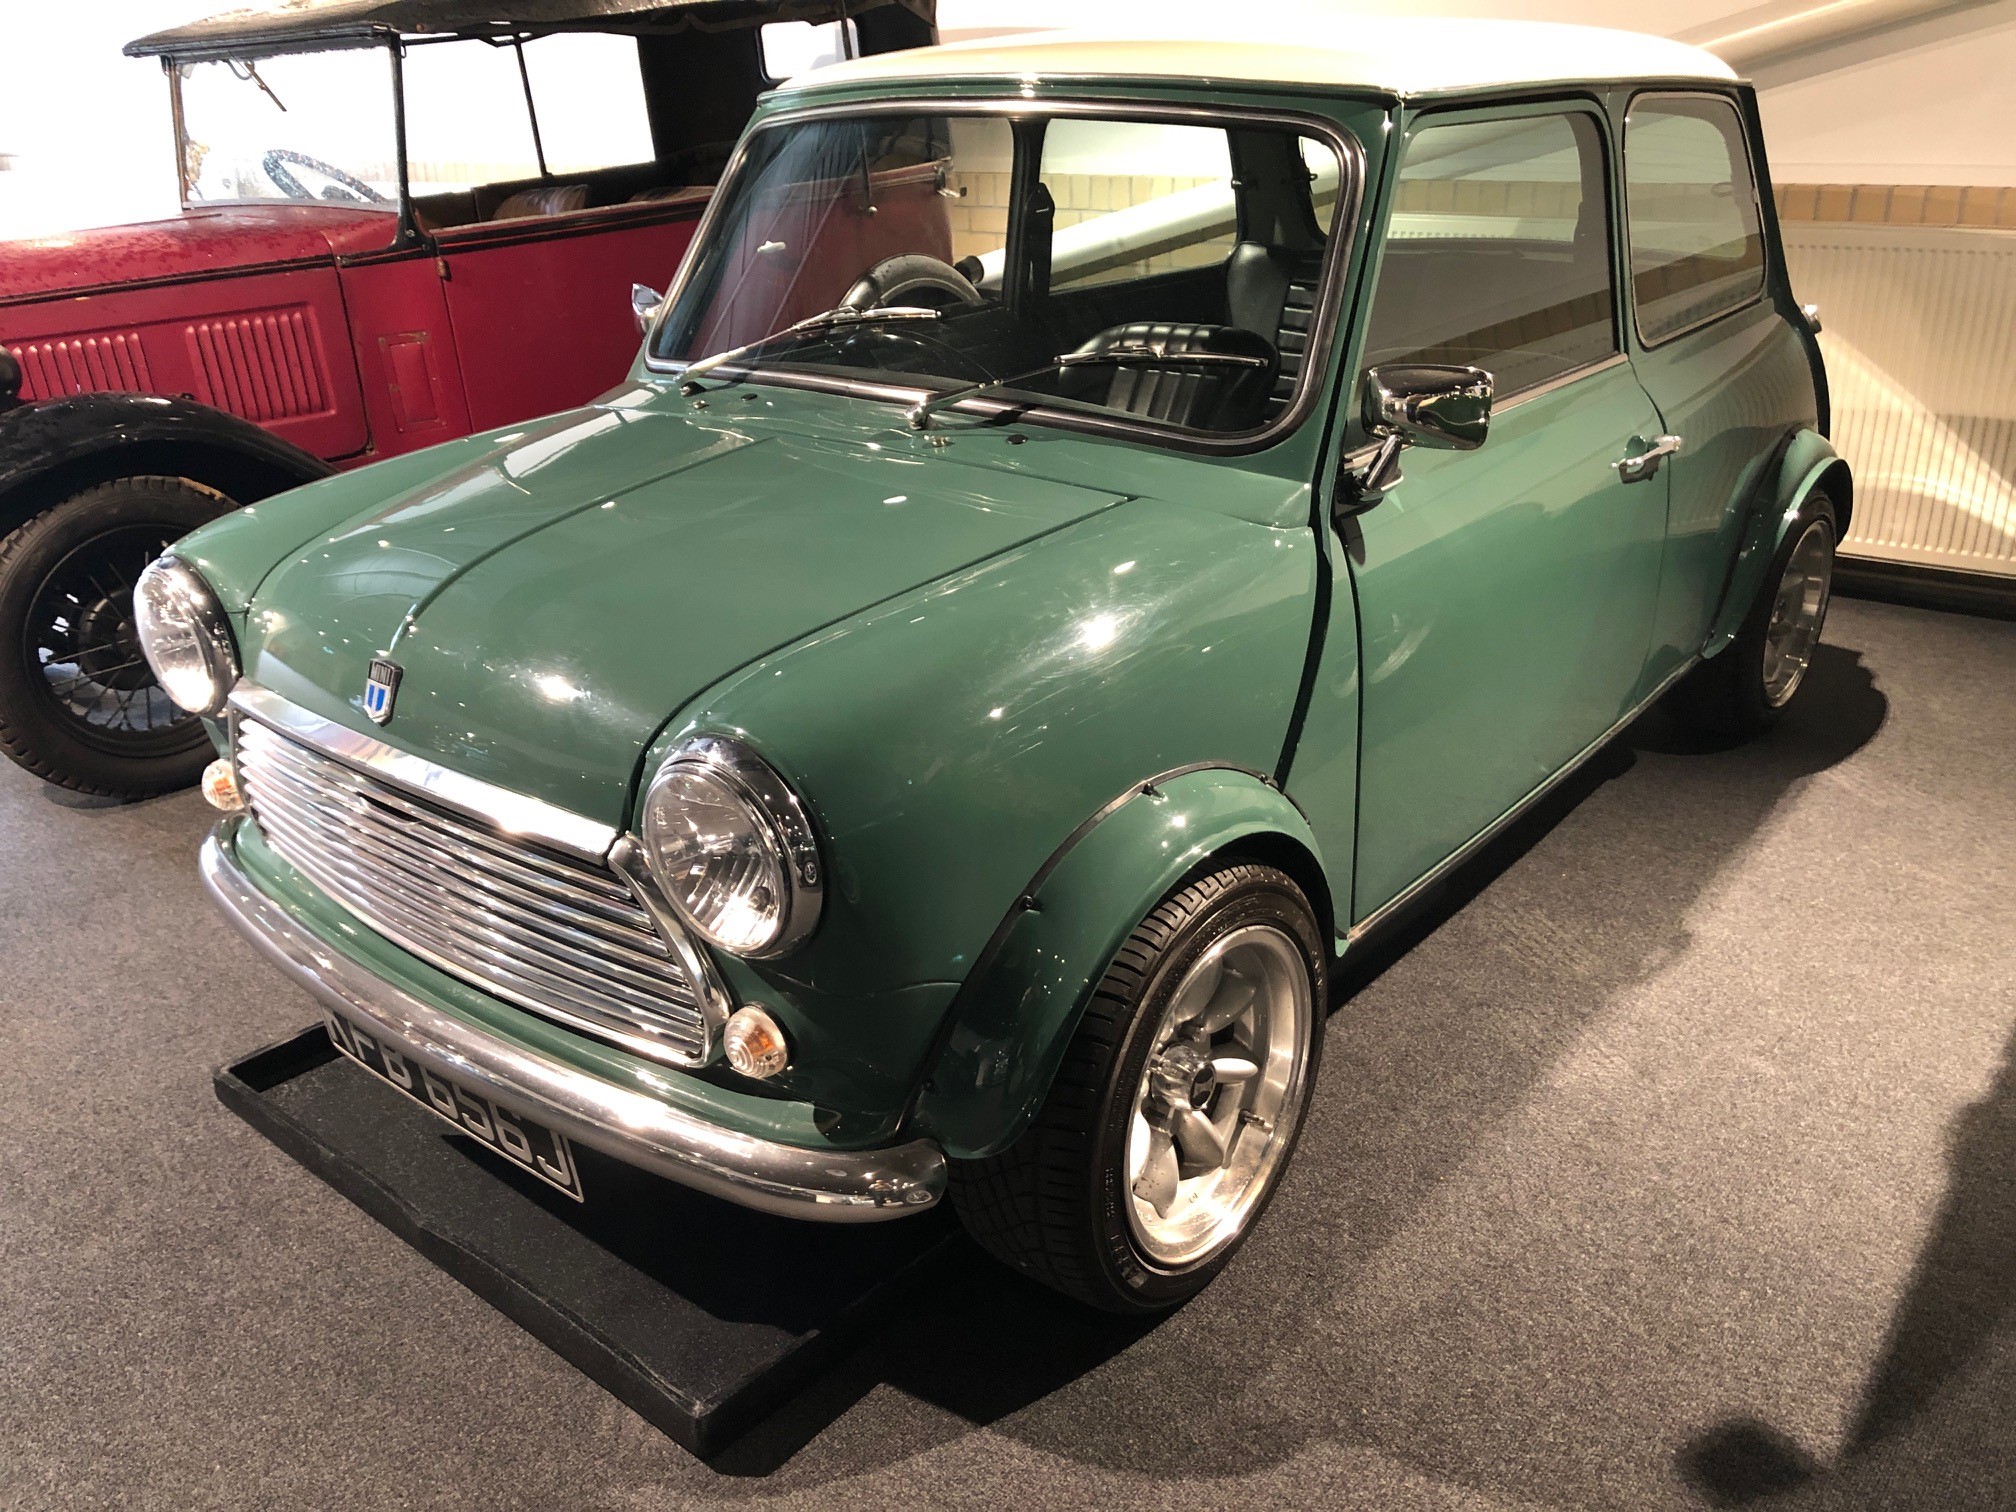 1971 Mini Cooper S Recreation Registration number KFB 656J Green with a white roof Black interior - Image 20 of 23